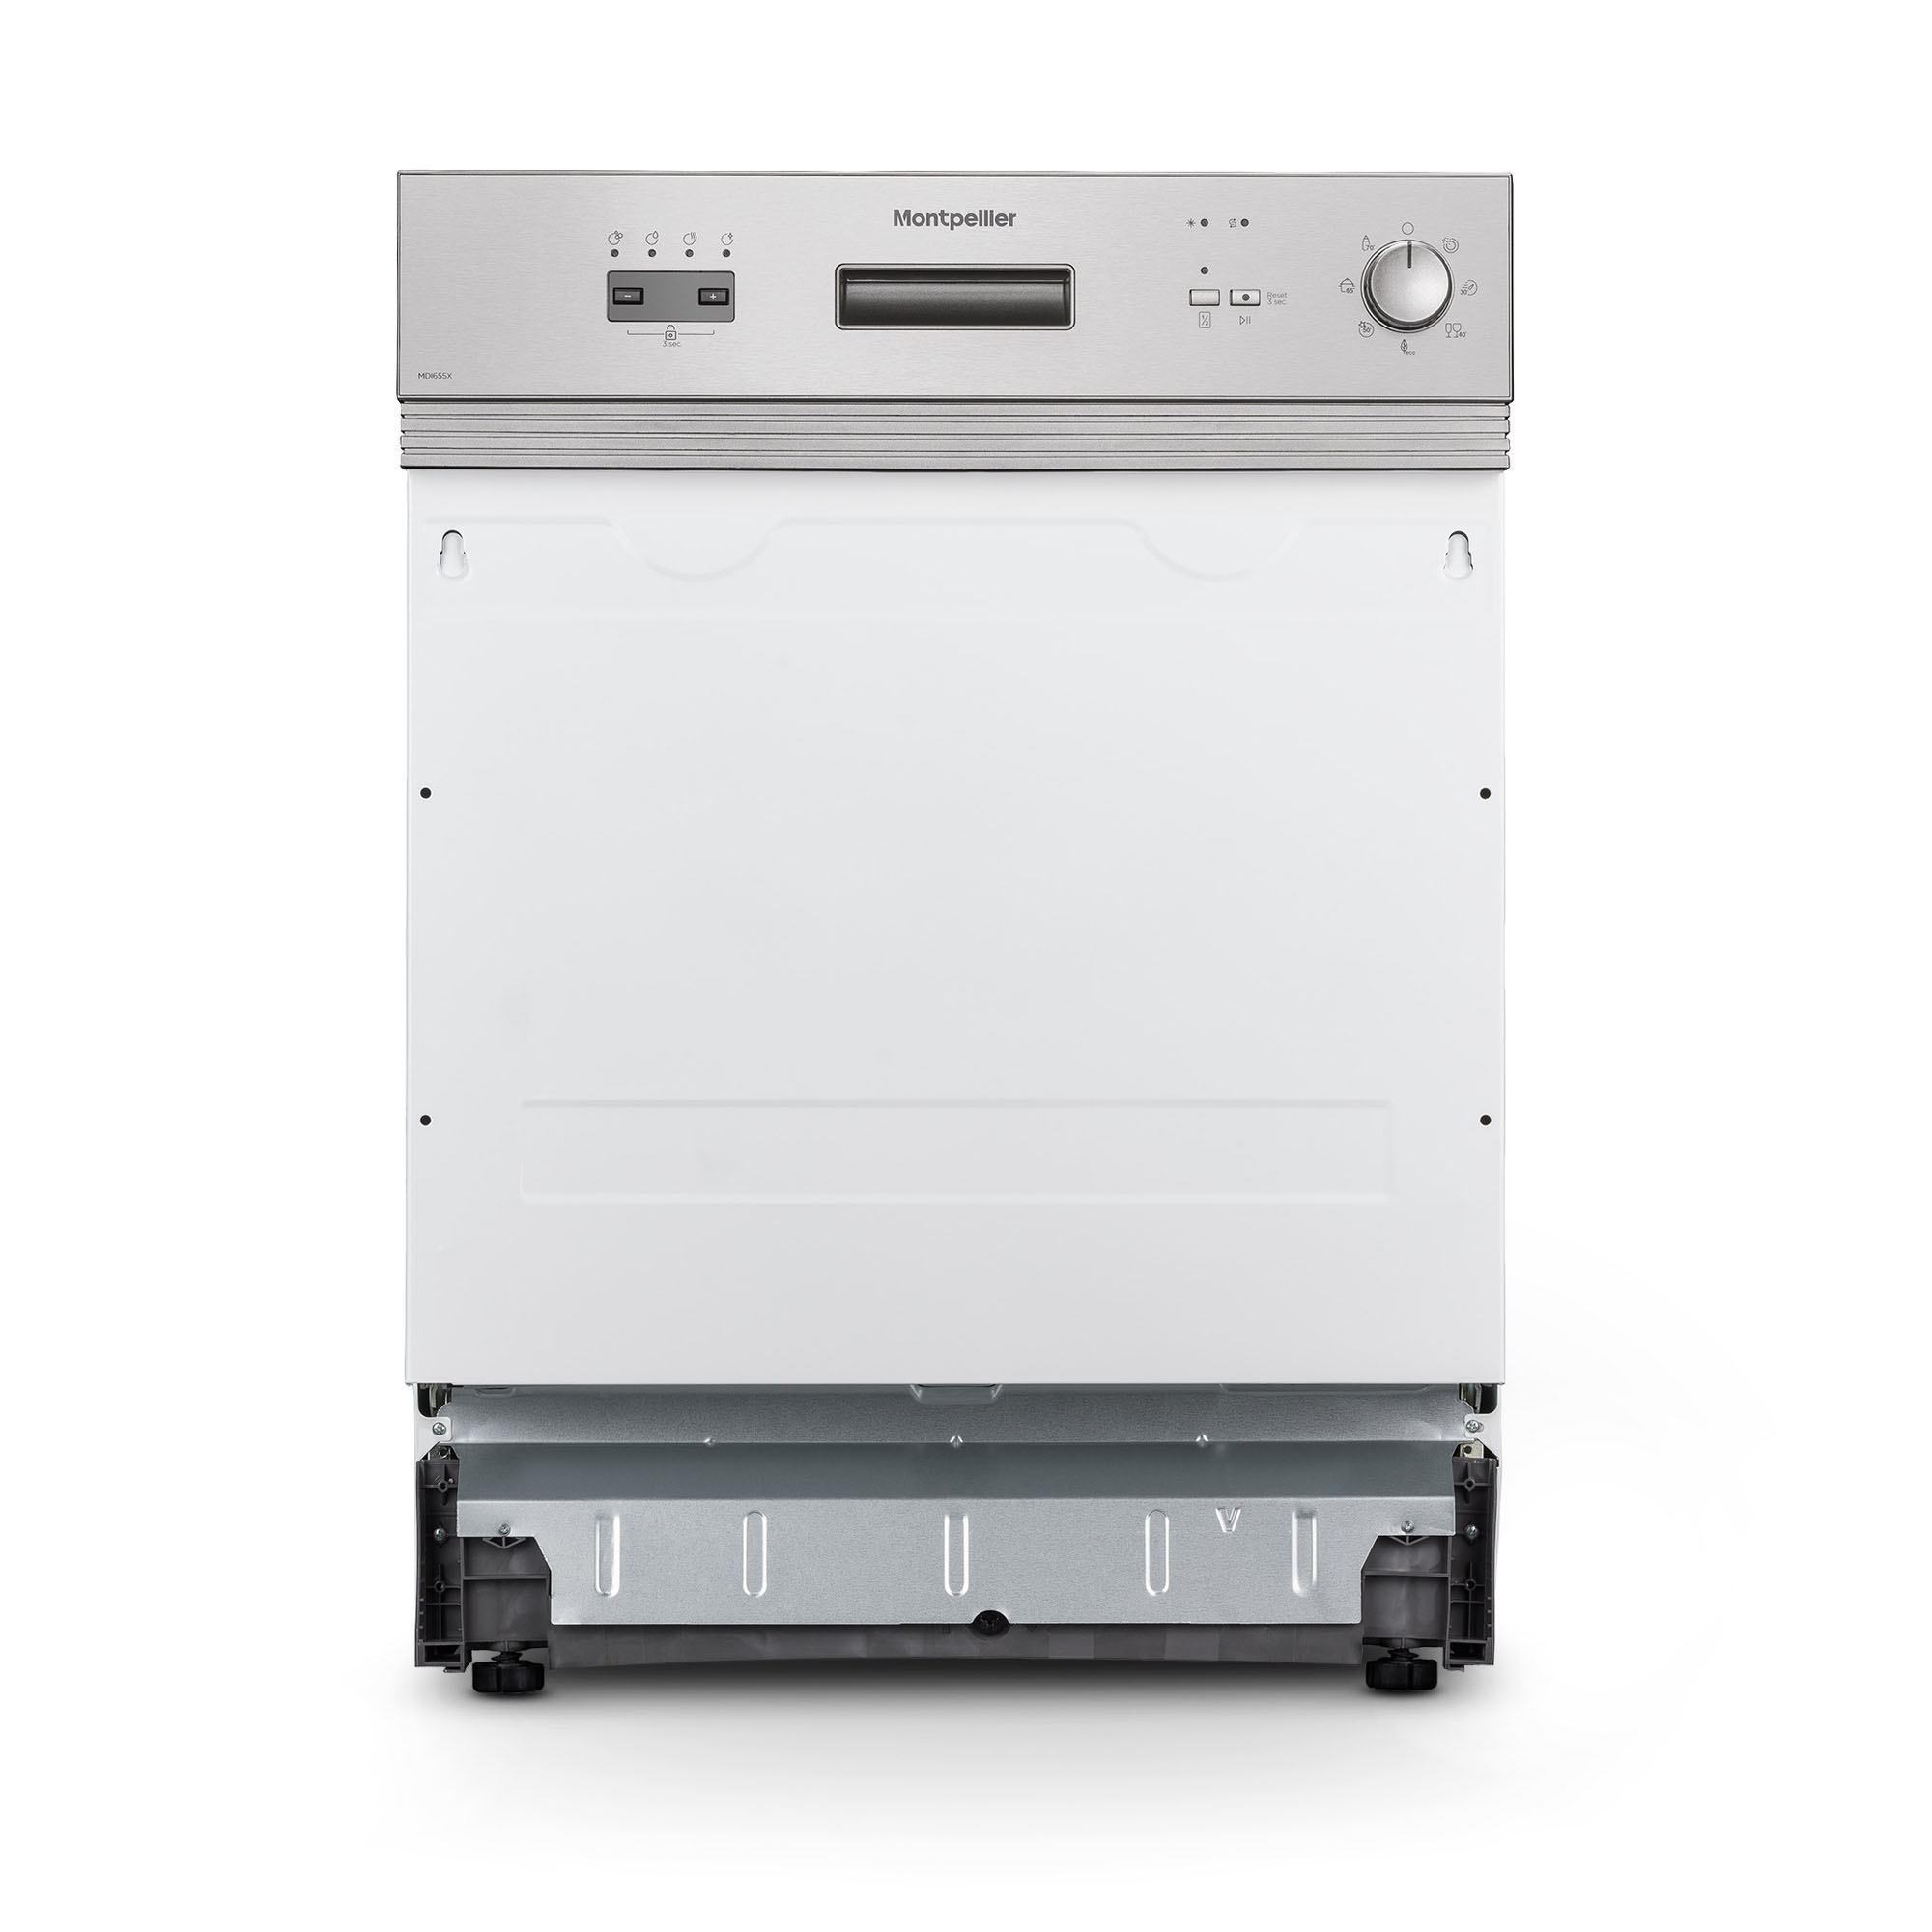 Montpellier MDI655X Full Size 60cm Semi Integrated Dishwasher in Stainless Steel